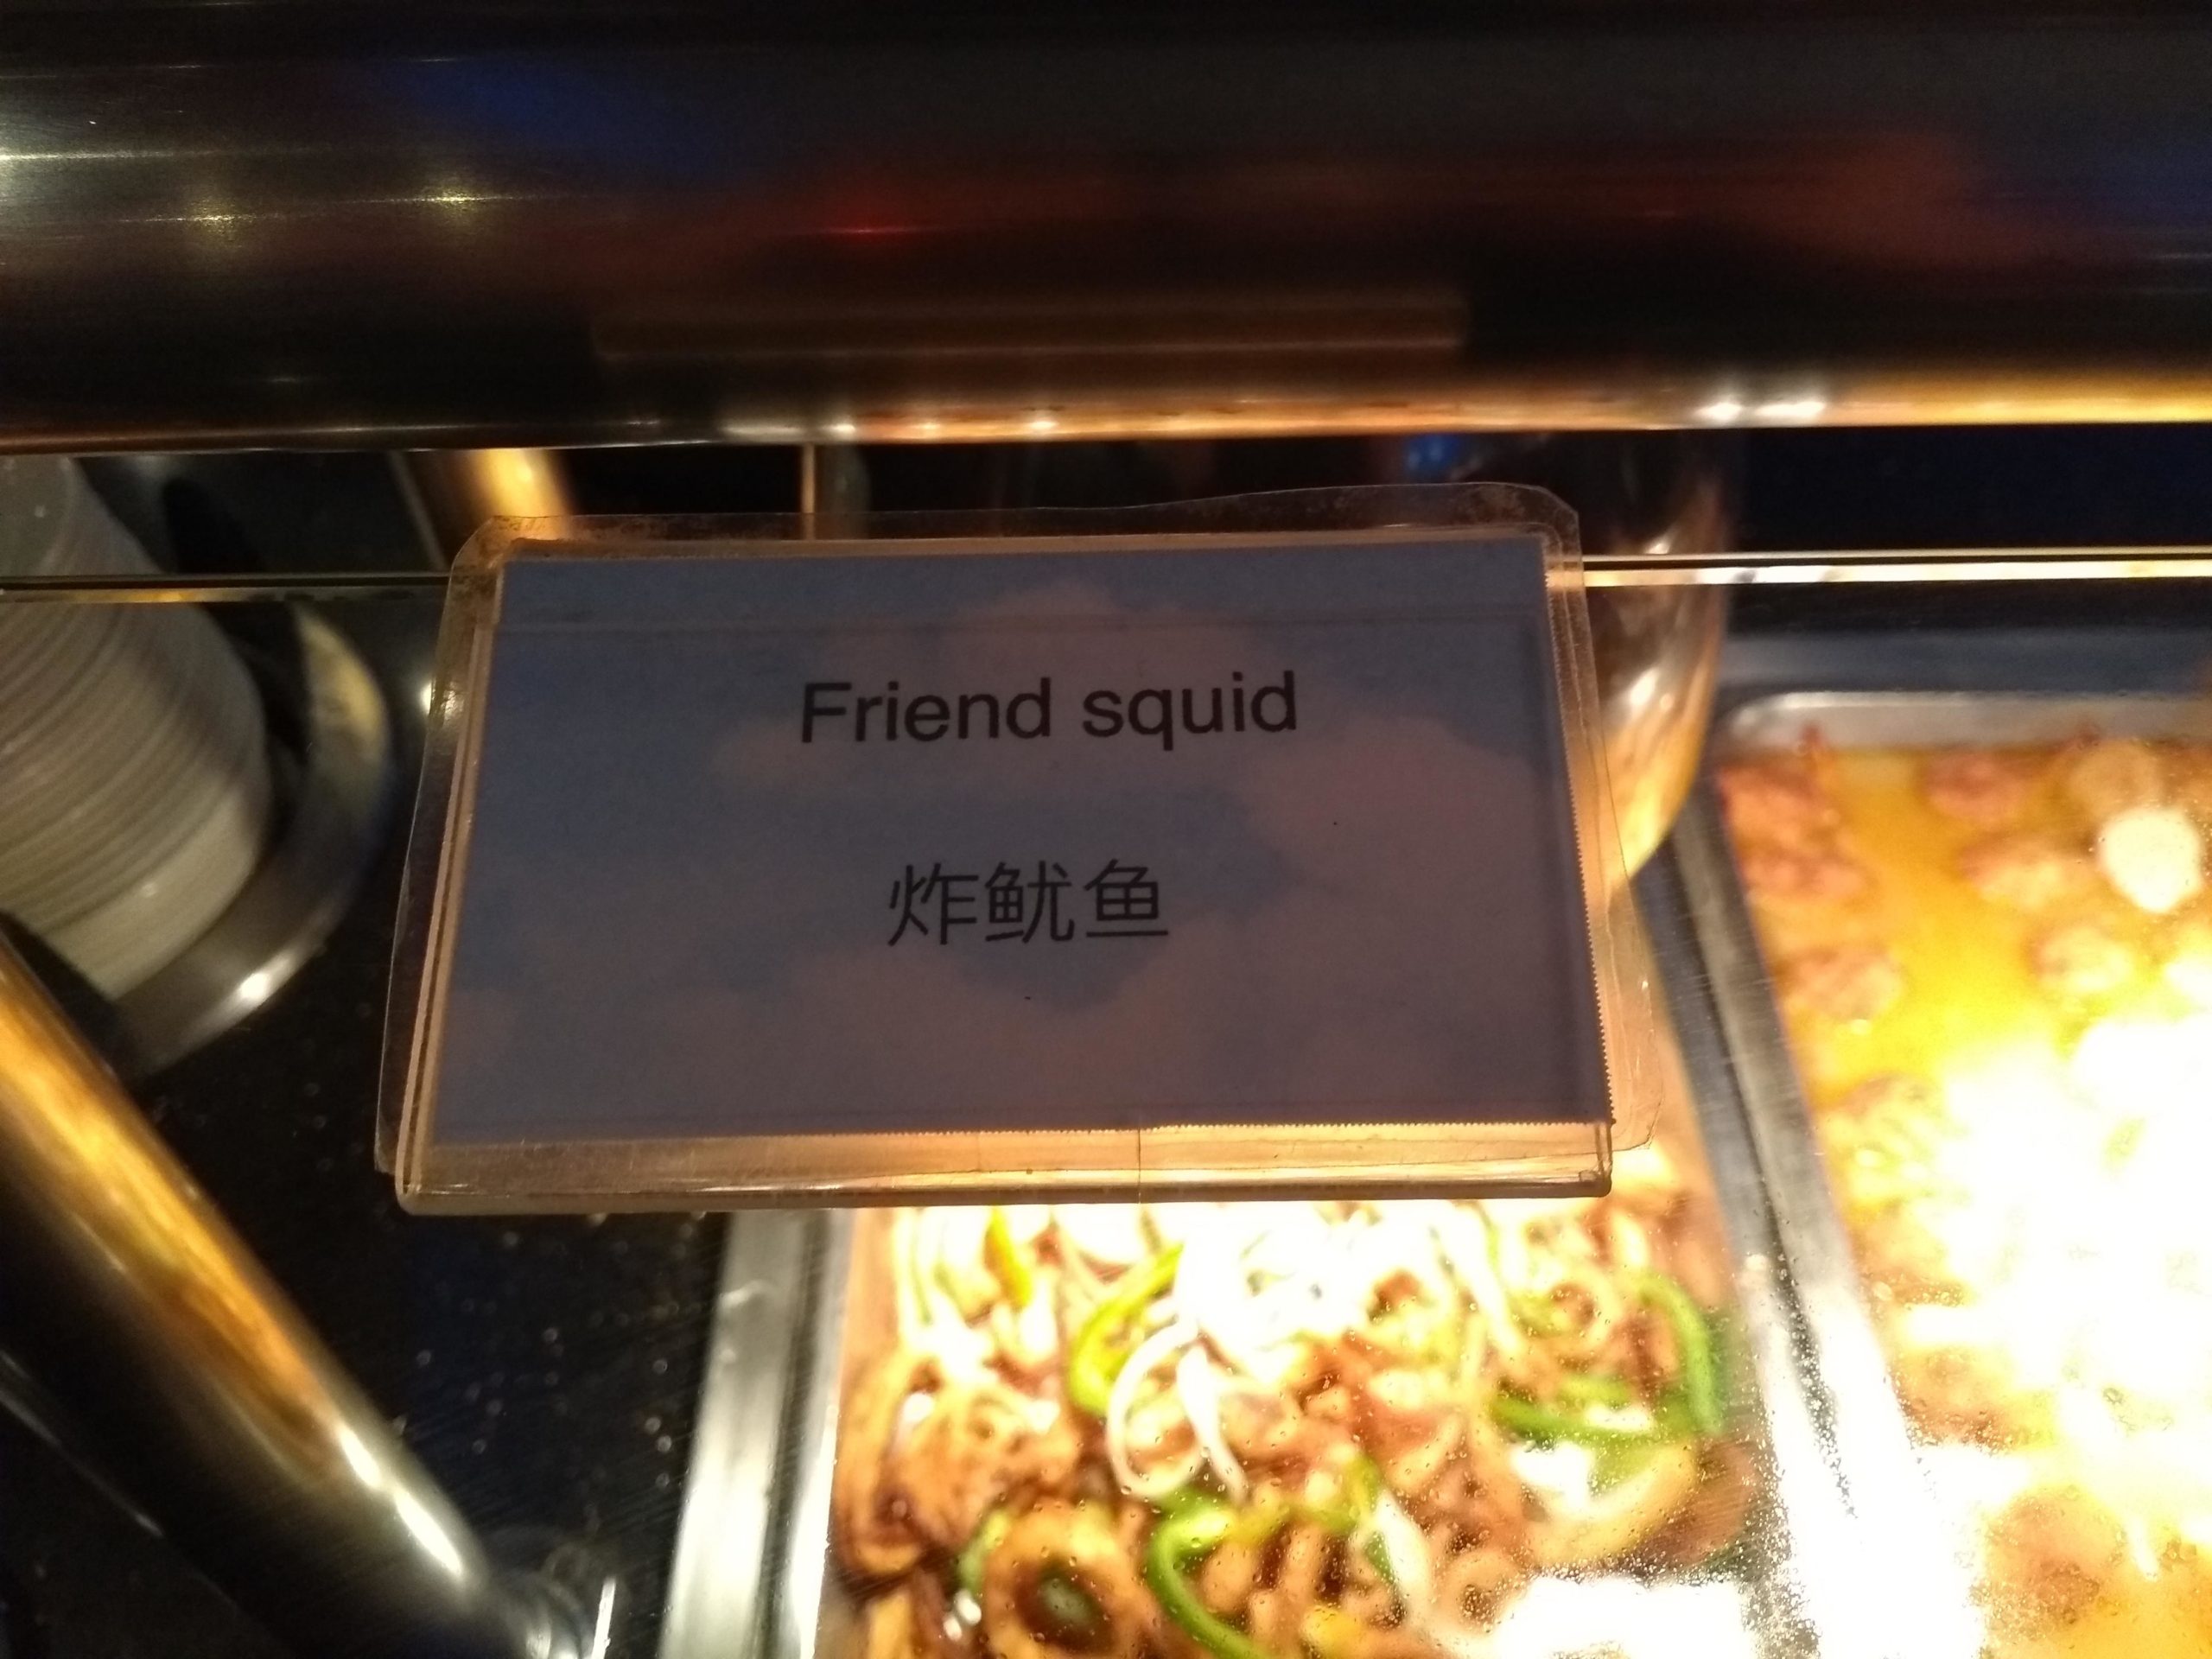 Squids+are+friends%2C+not+food%21